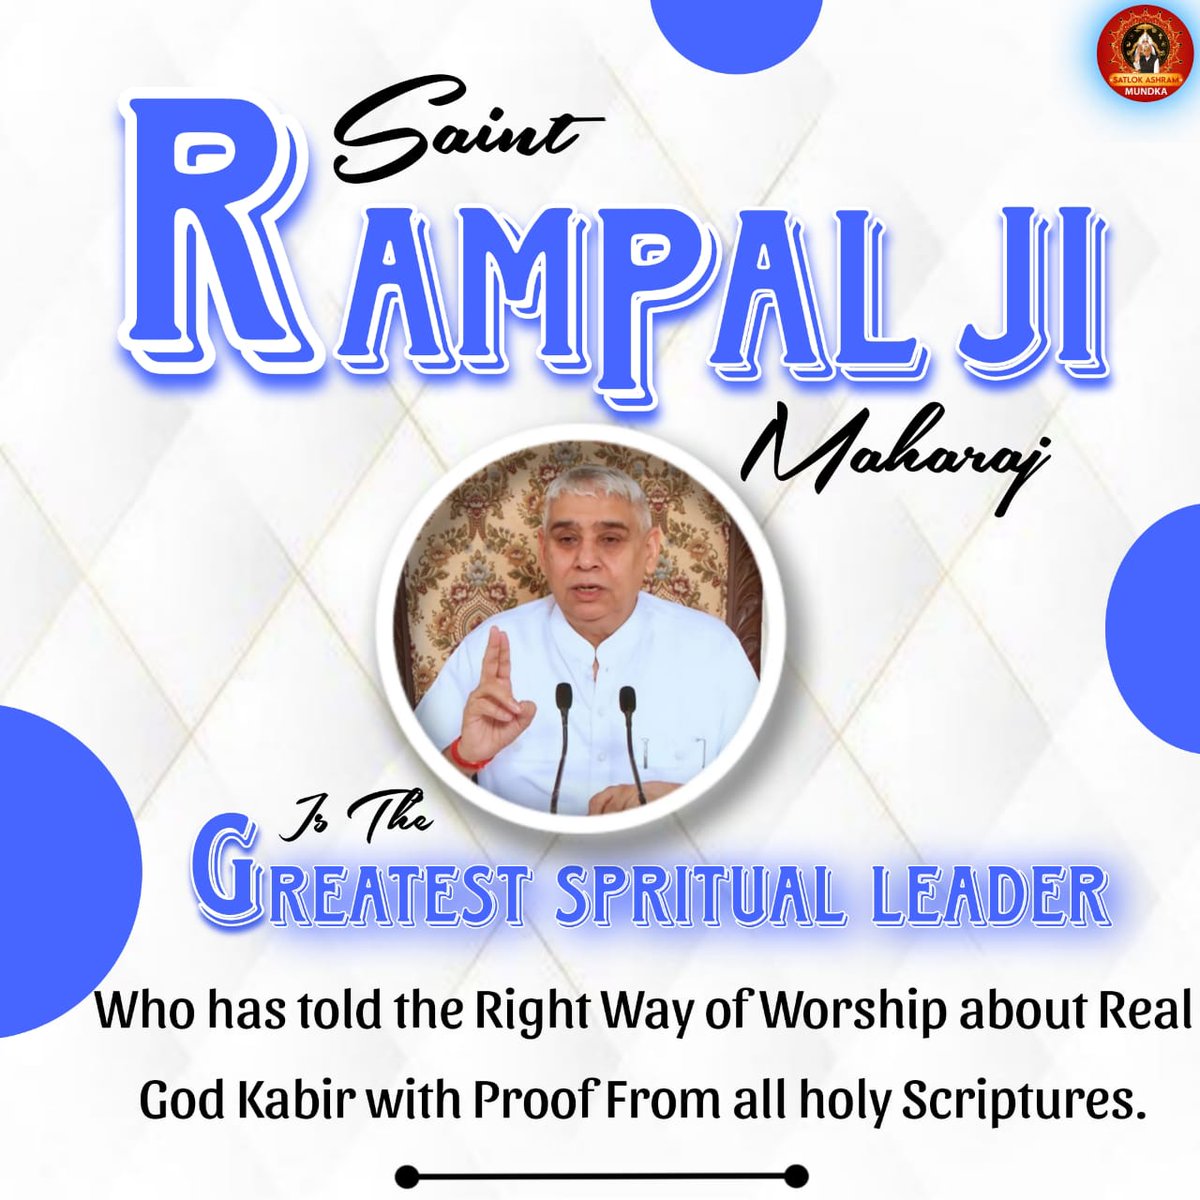 #GodMorningTuesday Saint Rampal Ji Maharaj is the greatest spritual leader who has told the Right Way of Worship about Real God Kabir with Proof From all holy Scriptures.